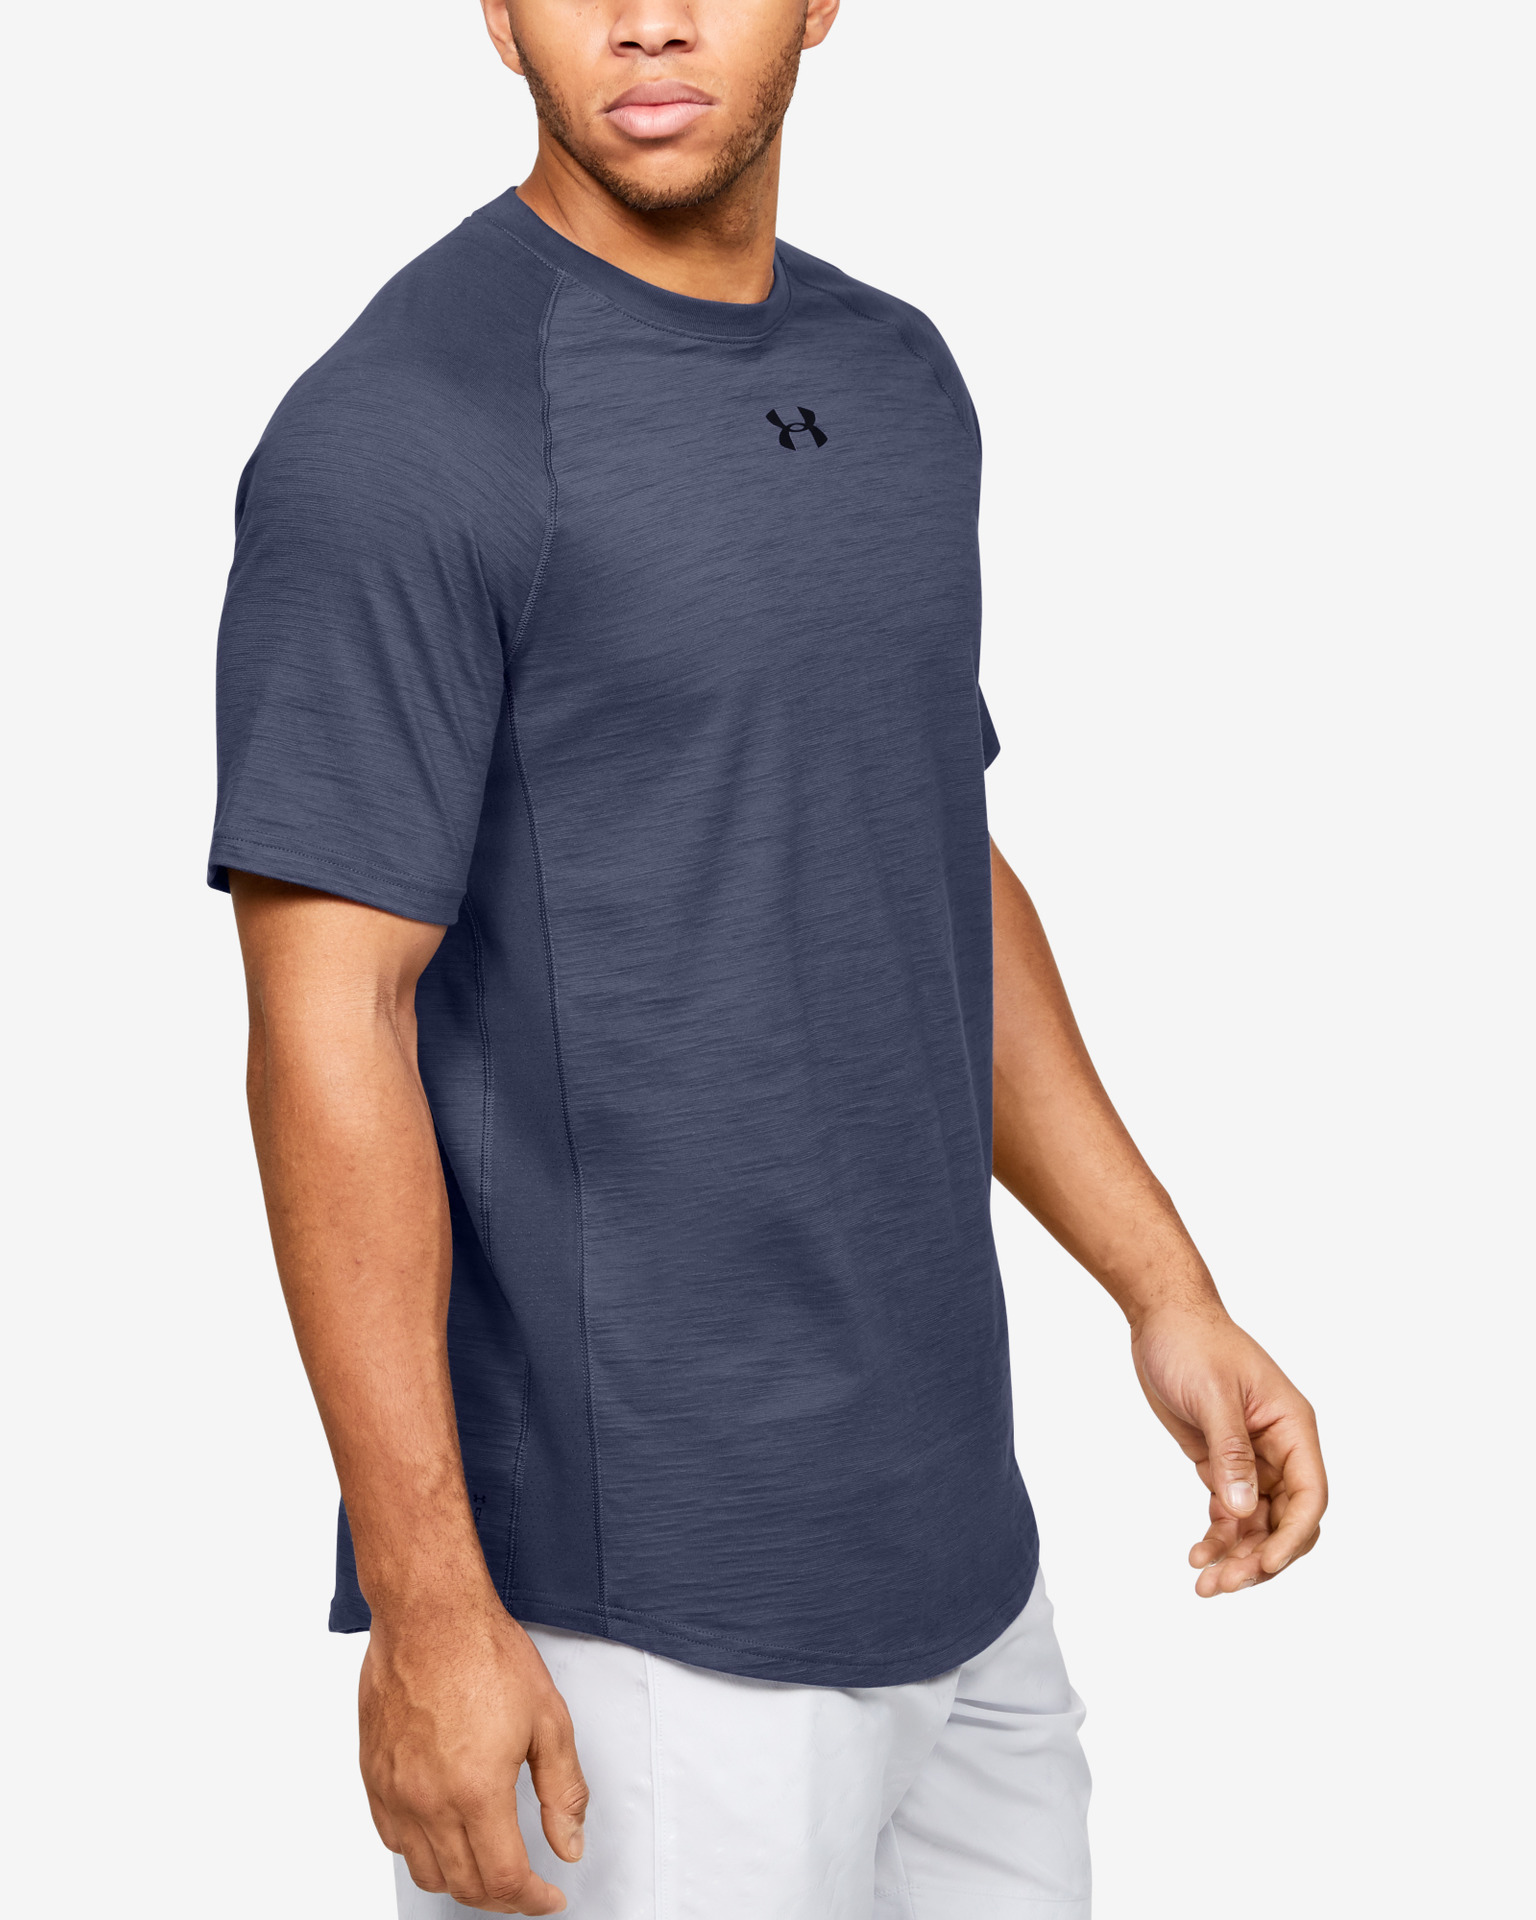 Under Armor Charged Cotton 2024